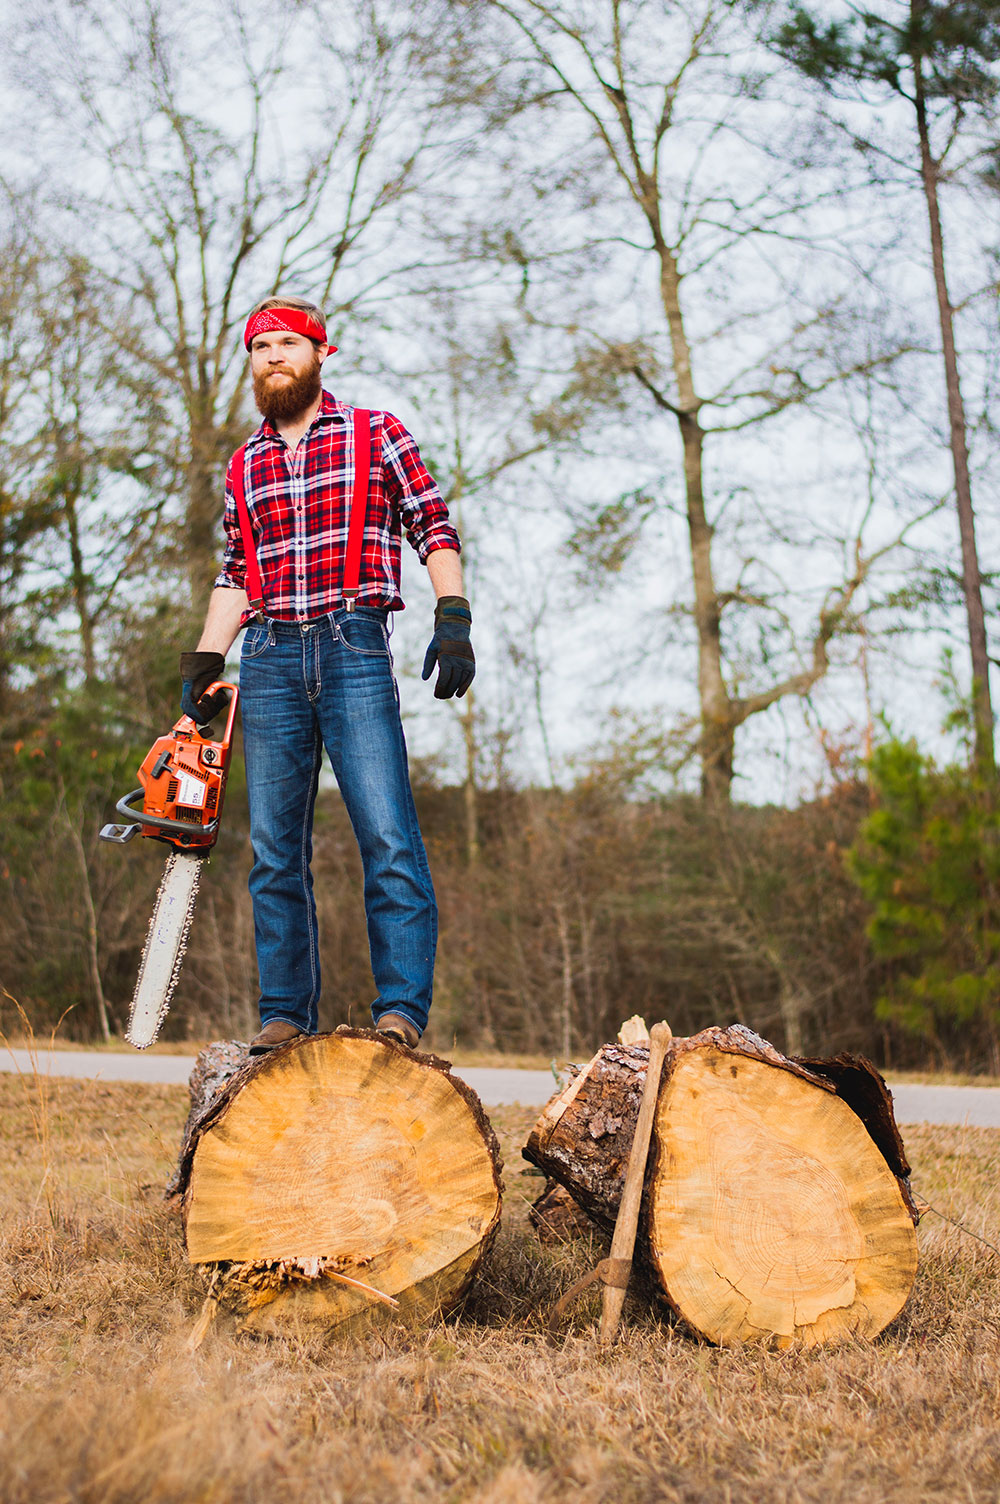 abby-savage-fqsT_W5JwSc-unsplash The importance of product reviews when choosing the best cordless chainsaw